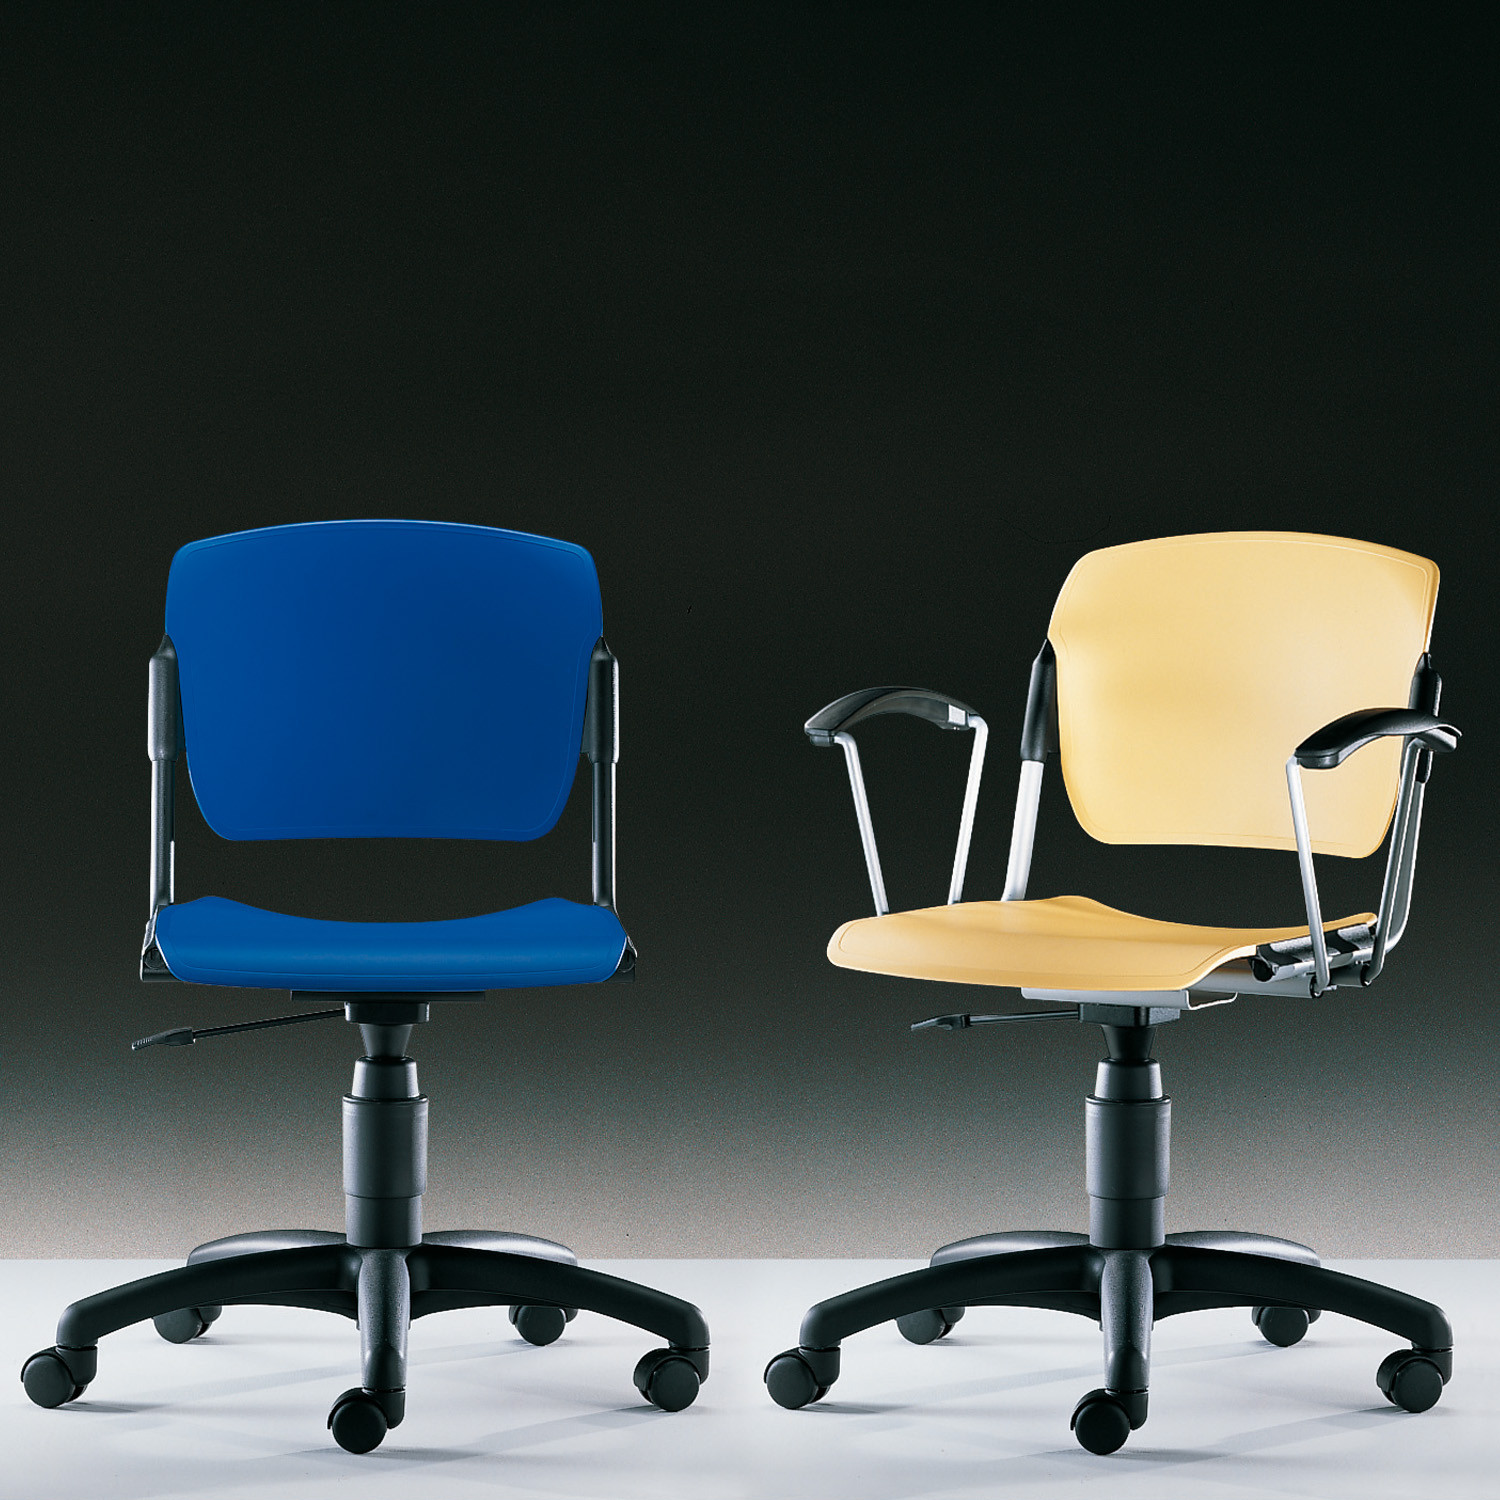 Mimi Chair is also available on castors